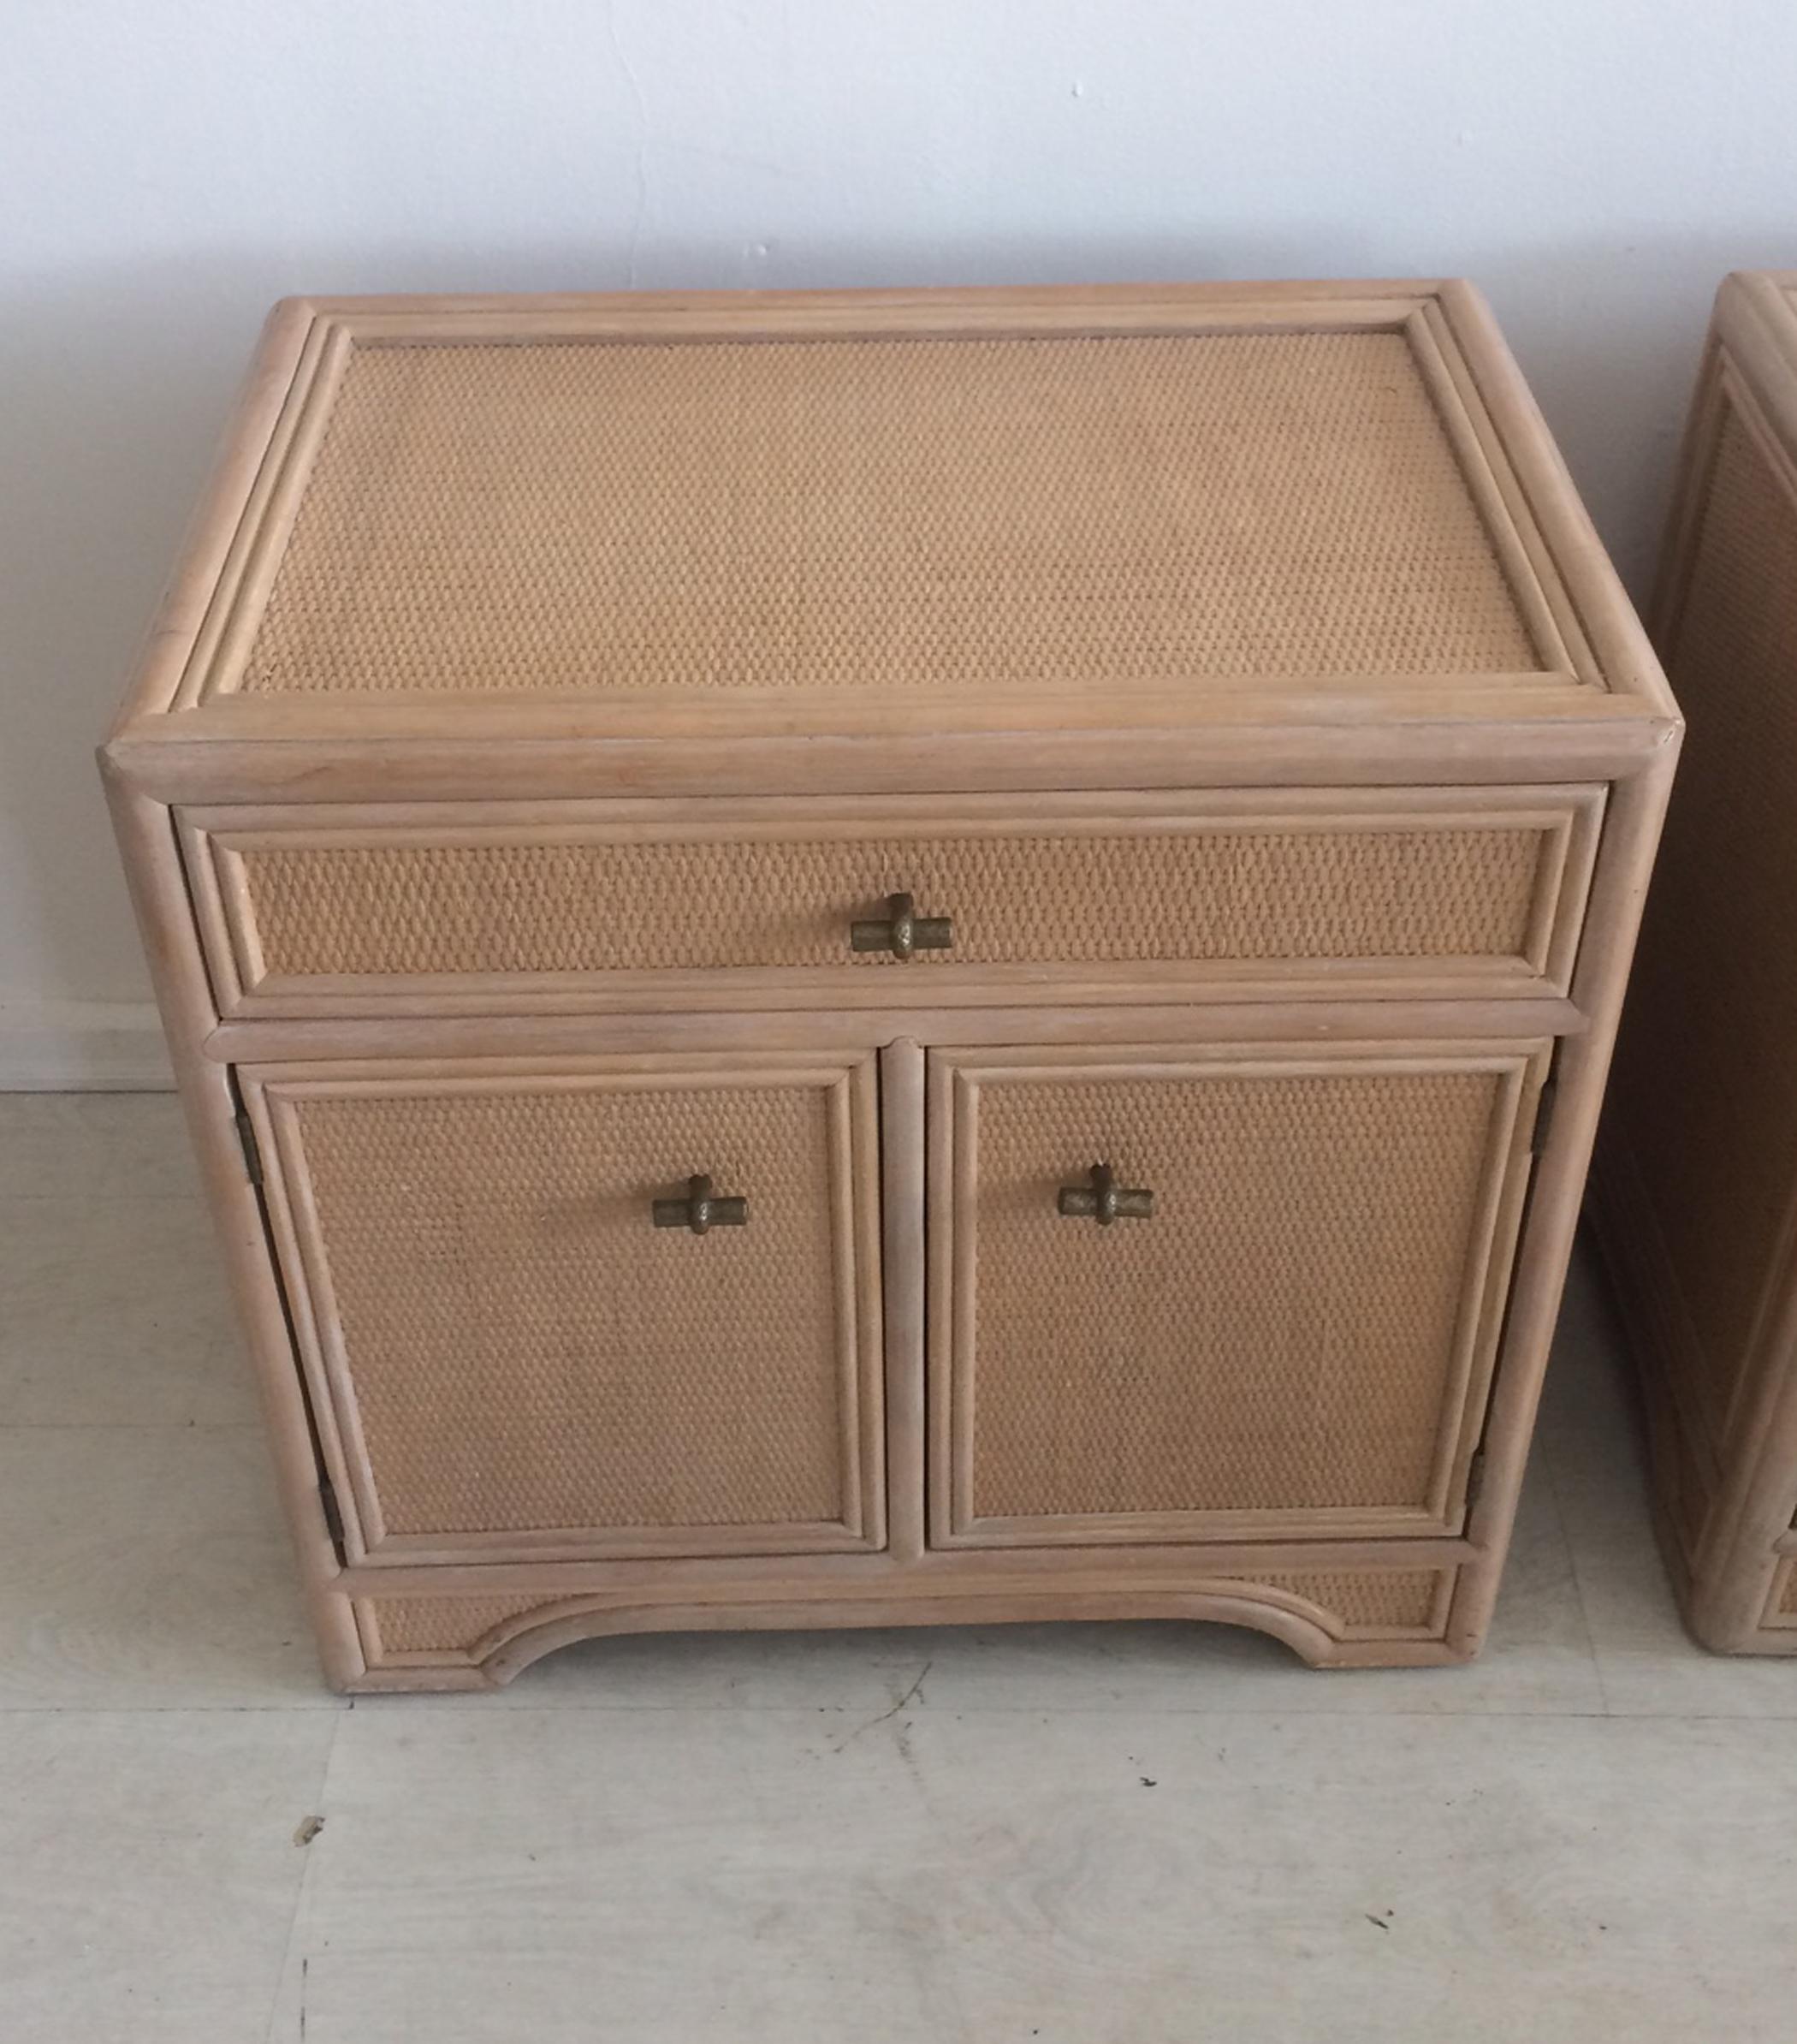 Chinese Chippendale style nightstands made by Ficks Reed. Constructed with rattan and woven cane. Upper drawer with double door cabinet below cast brass or bronze hardware. Quality furniture from a quality company. Works with many different decors